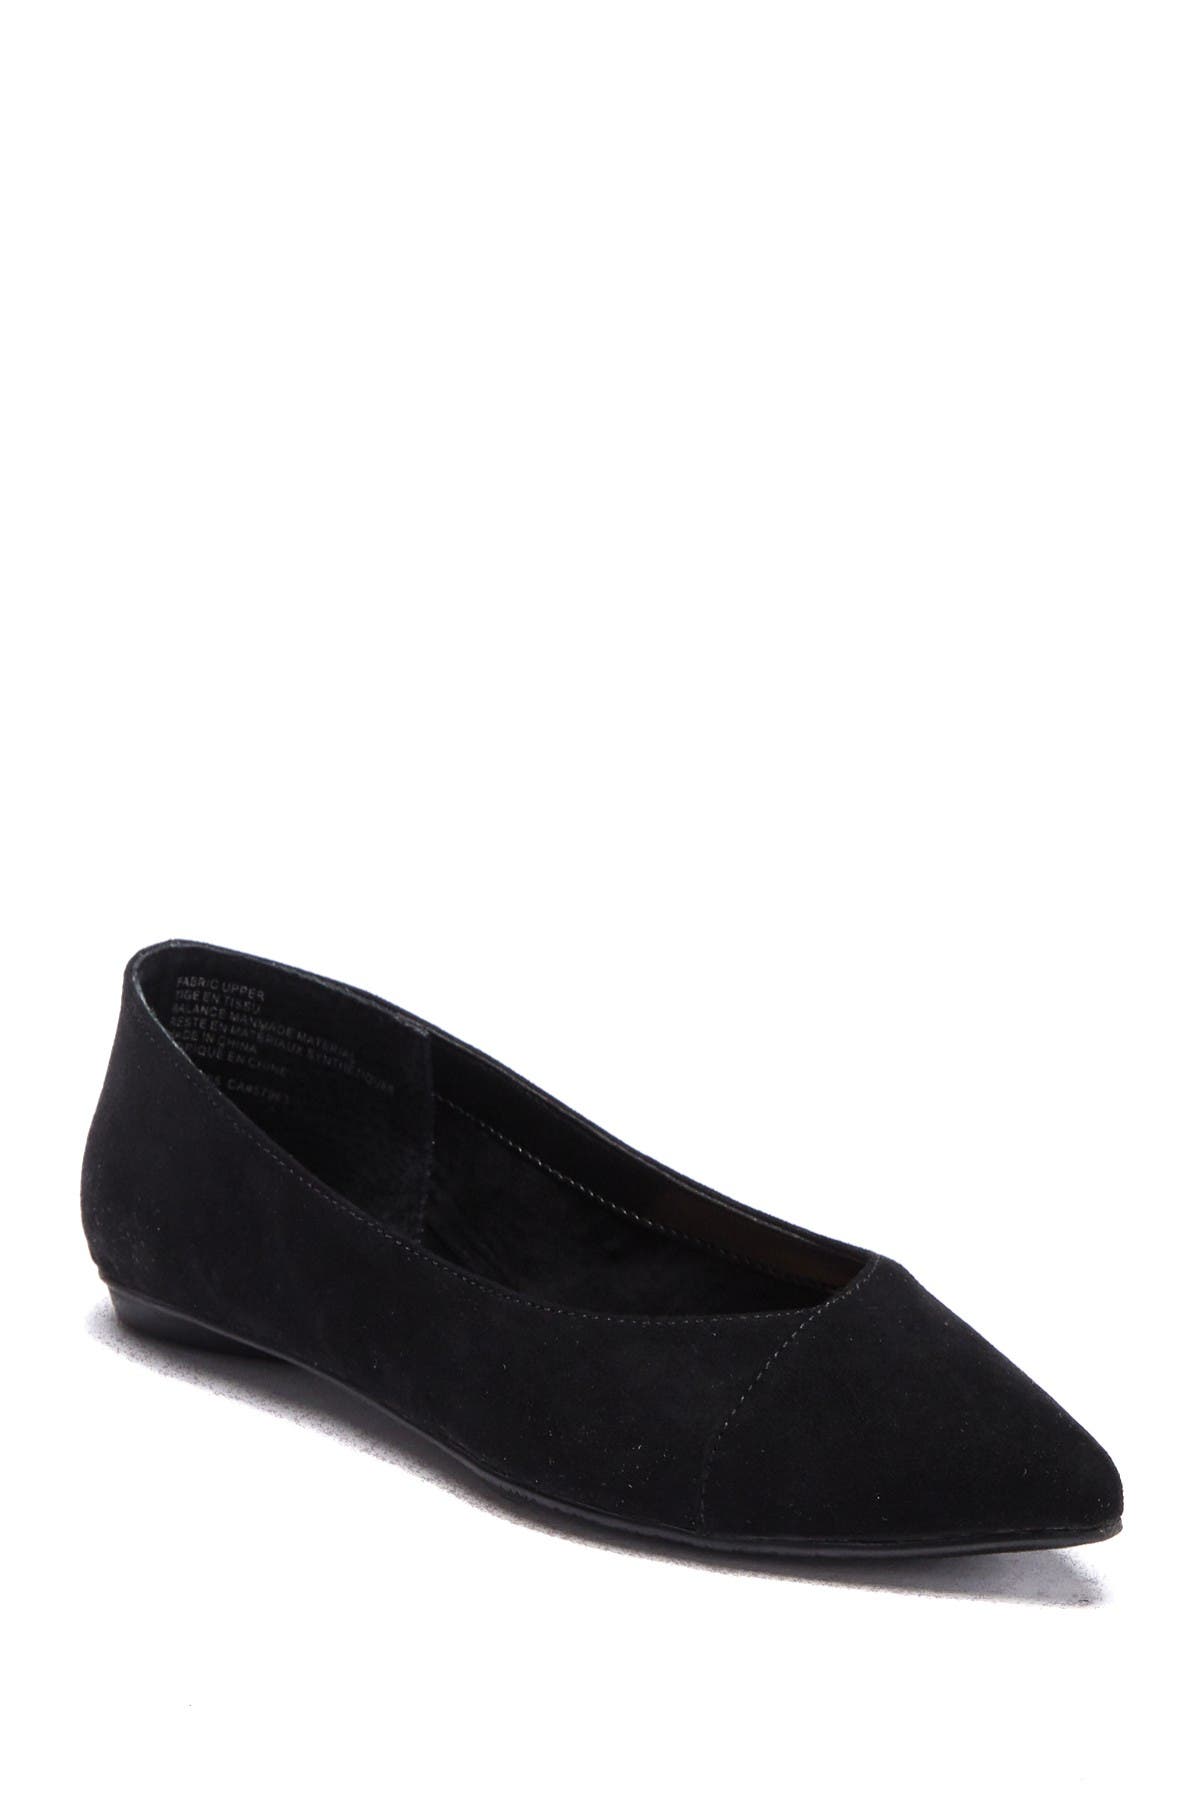 nordstrom pointed flats